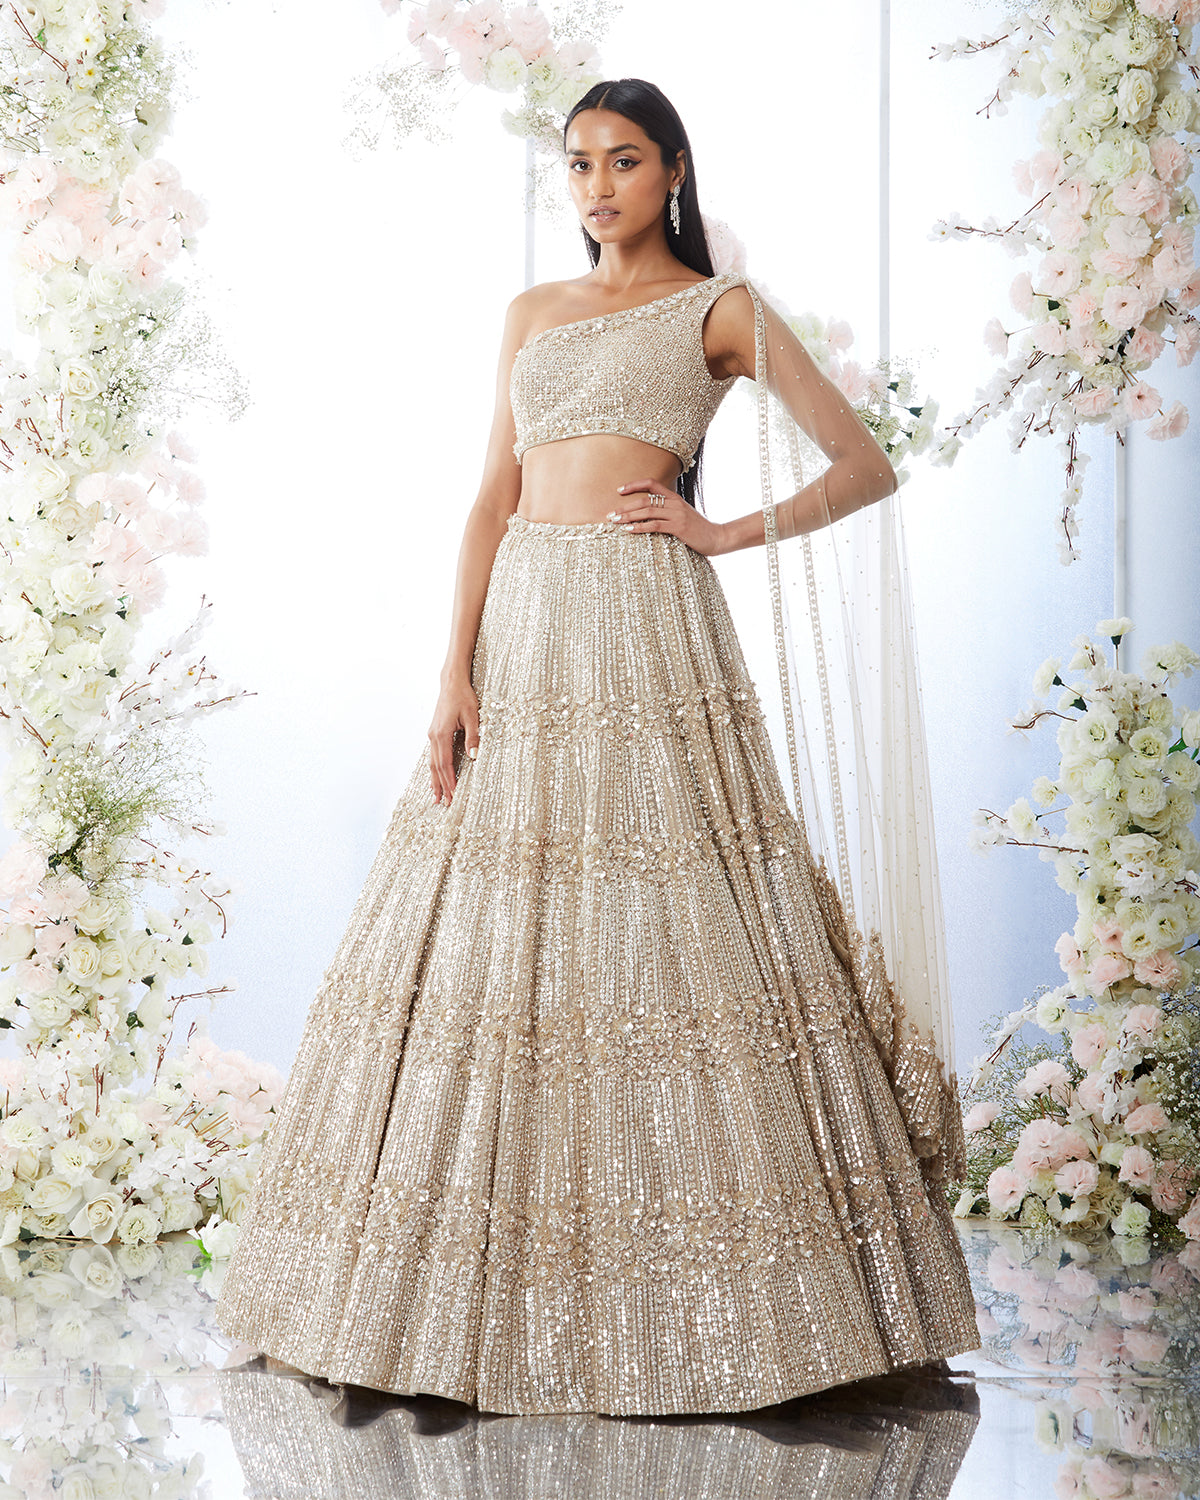 One Shoulder Champagne Lehenga with Platinum Cut Sequins by Seema Gujral at KYNAH